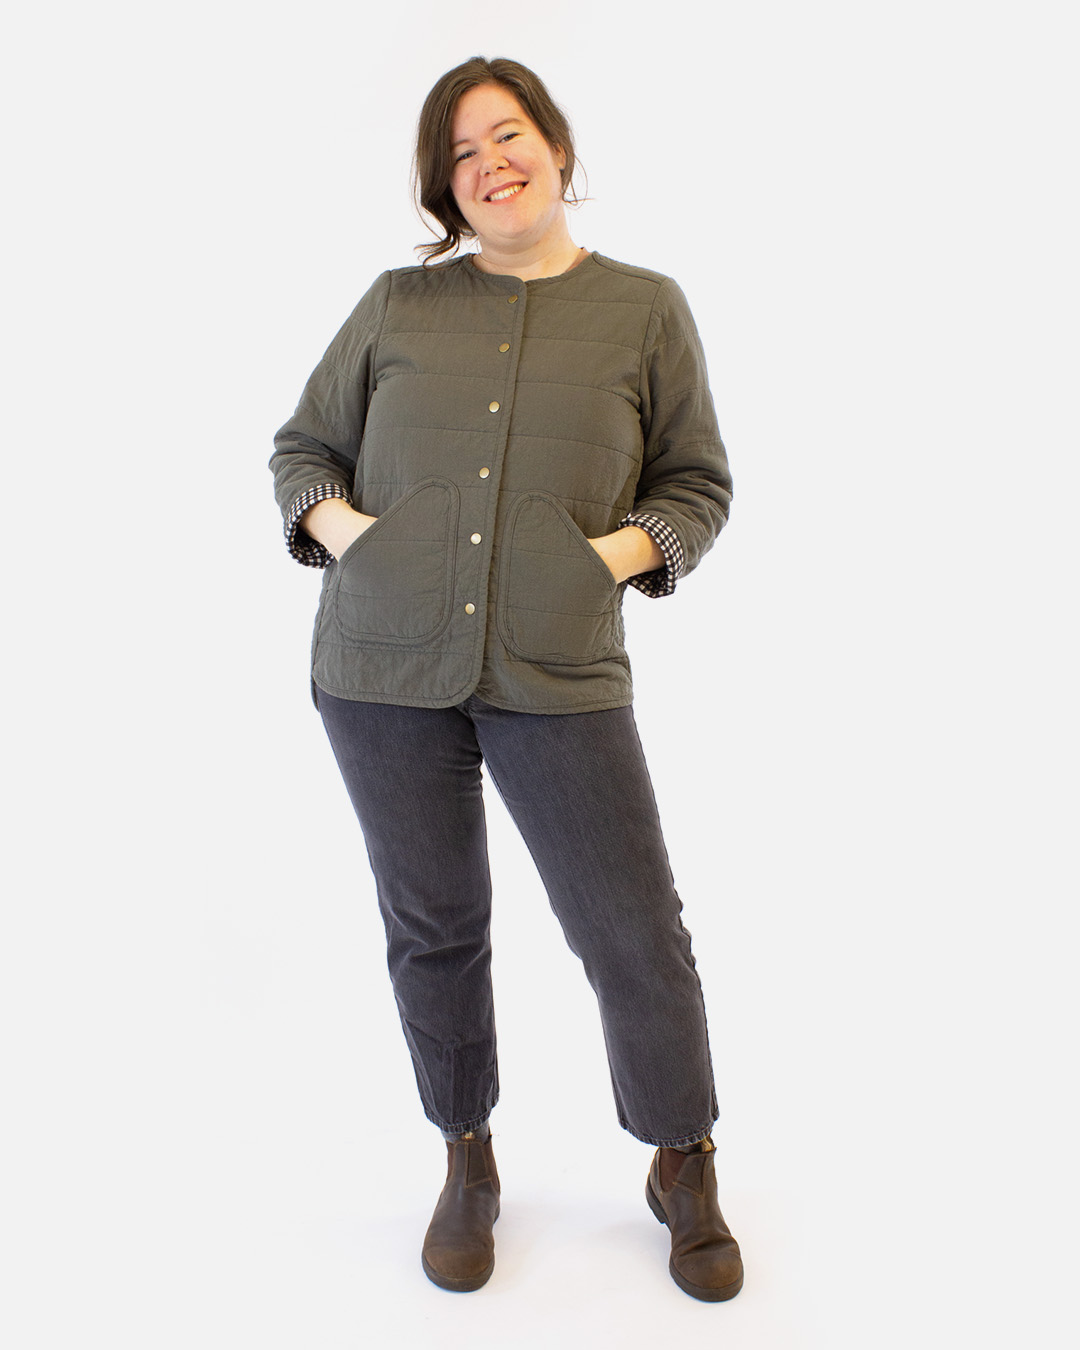 Woman wearing the Unisex Wildwood Jacket sewing pattern from Helen's Closet on The Fold Line. A Quilted Jacket pattern made in cotton, flannel, linen, wool, and hemp fabrics, featuring overlapping shoulder and side seams, bias taped edges, patch pockets, front snap closure, full length sleeves and low-hip length.